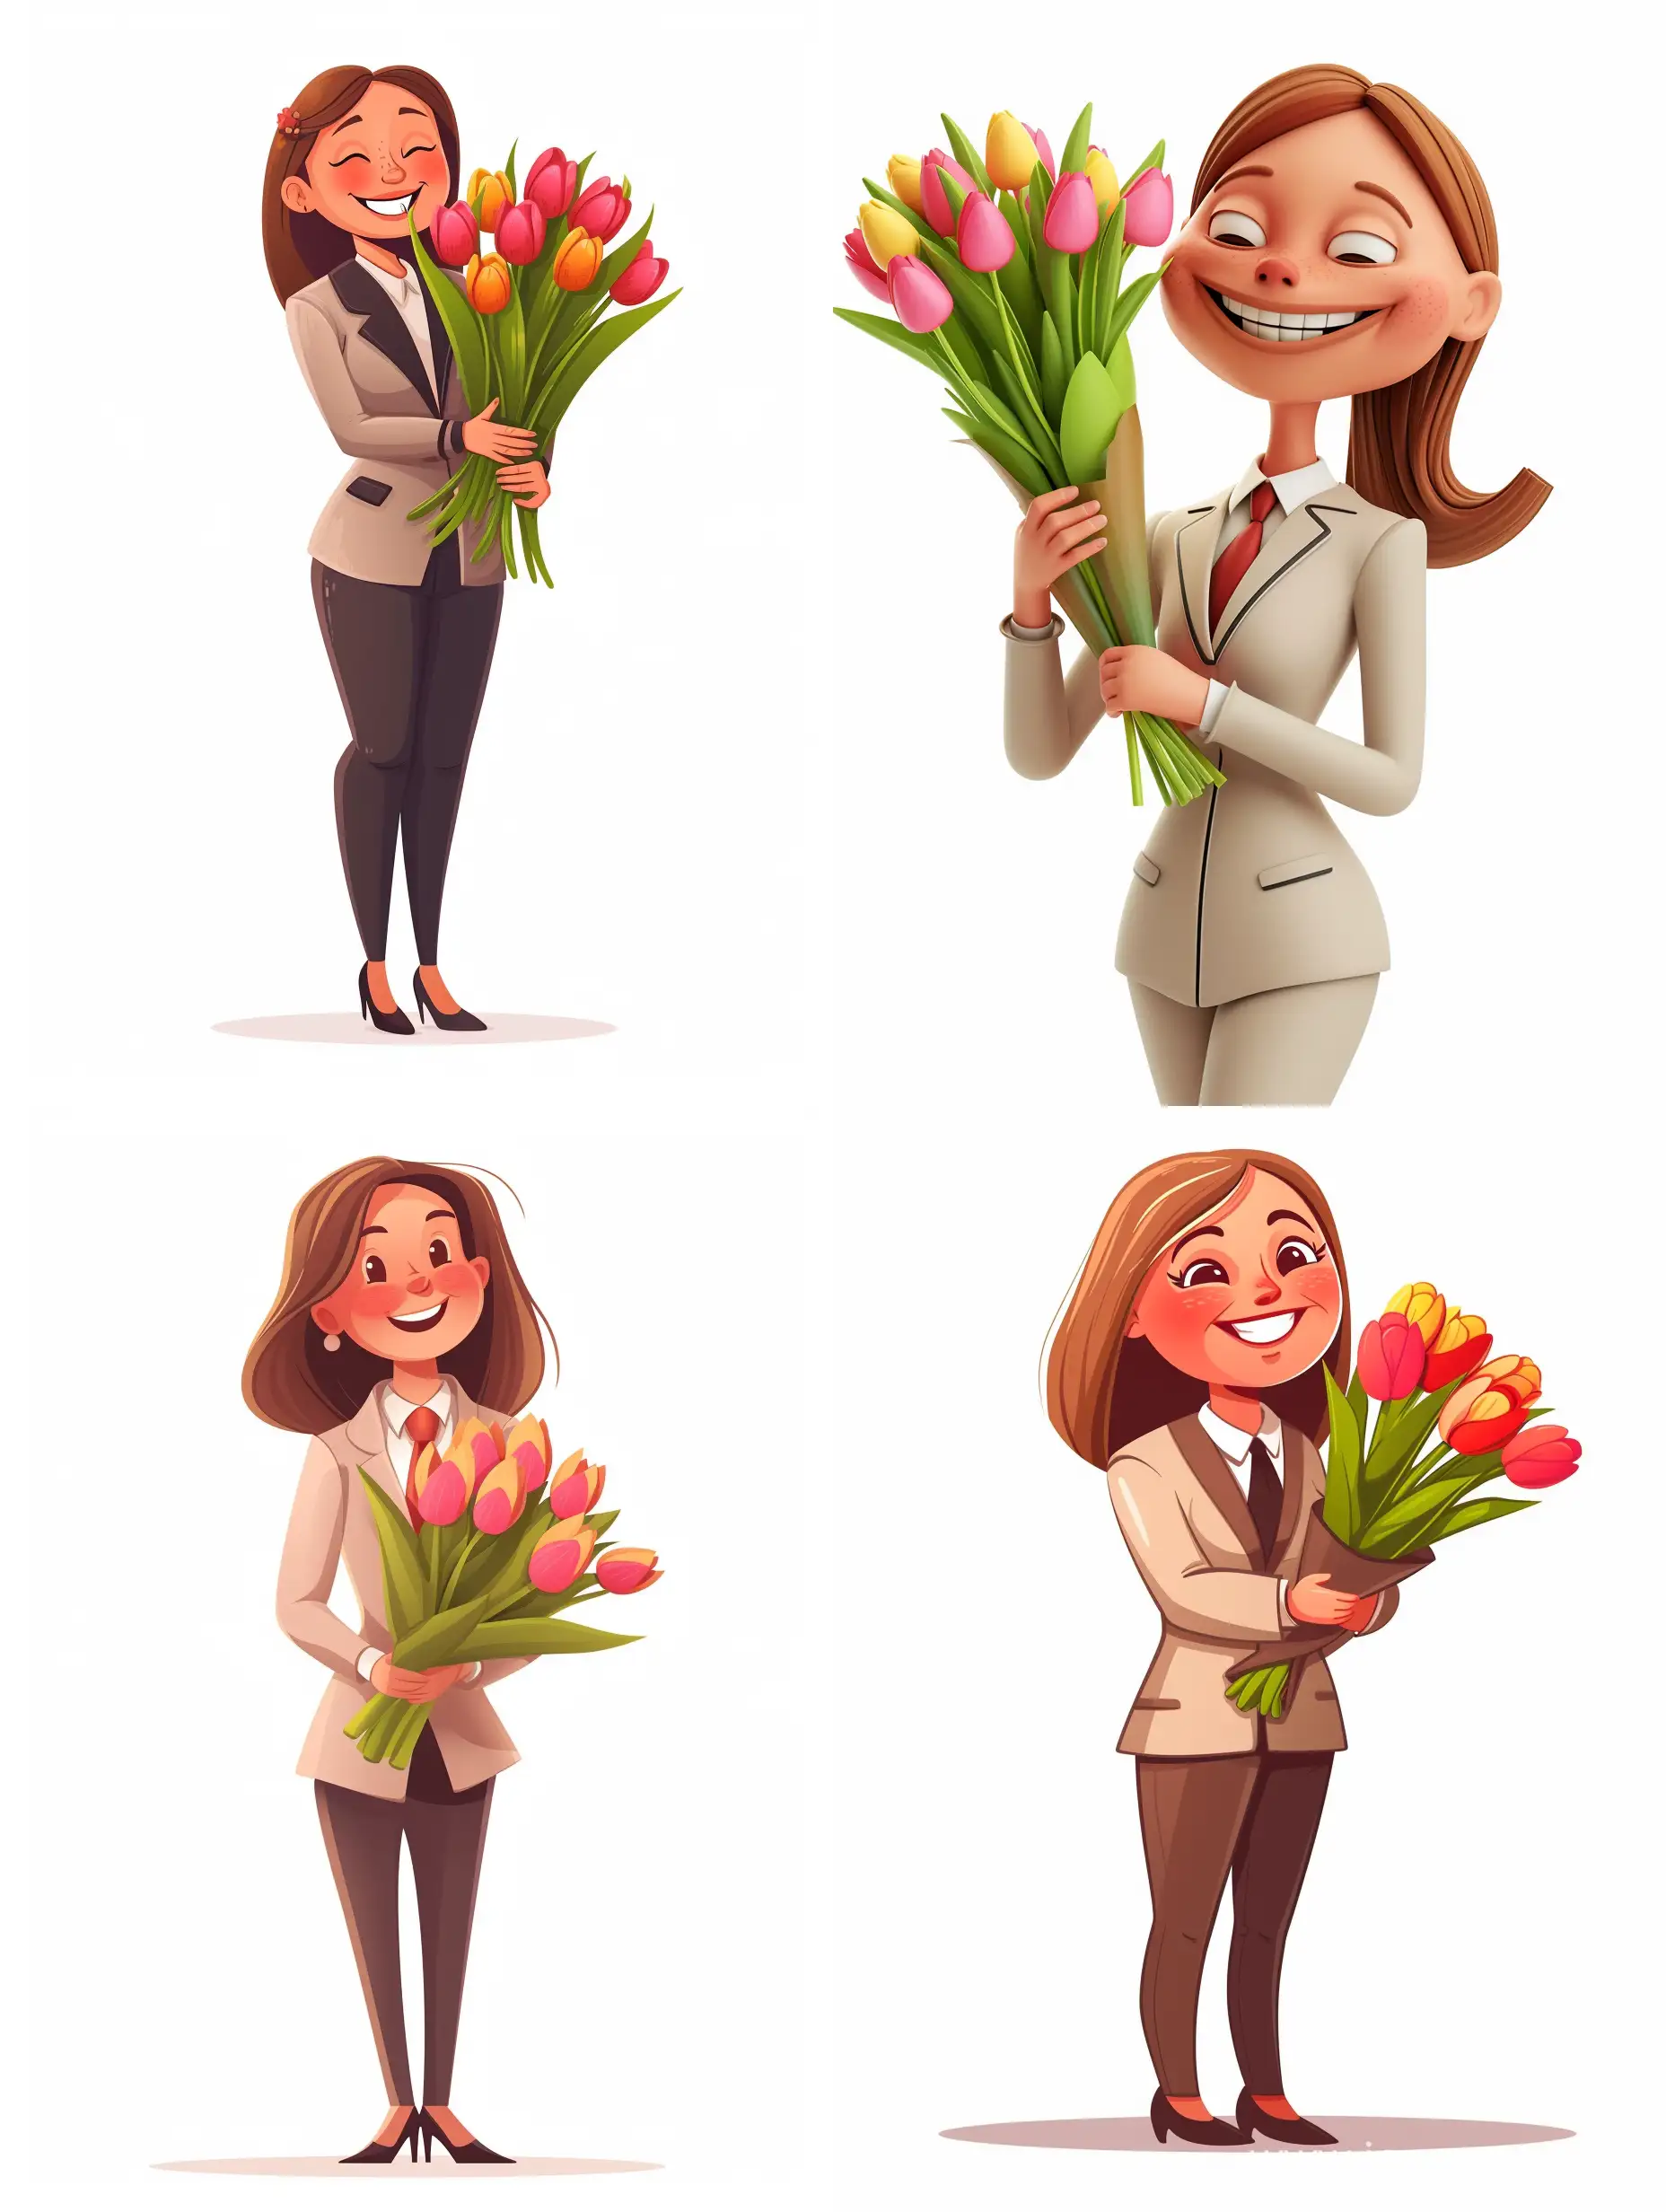 Cheerful-Corporate-Mascot-with-Tulip-Bouquet-on-White-Background